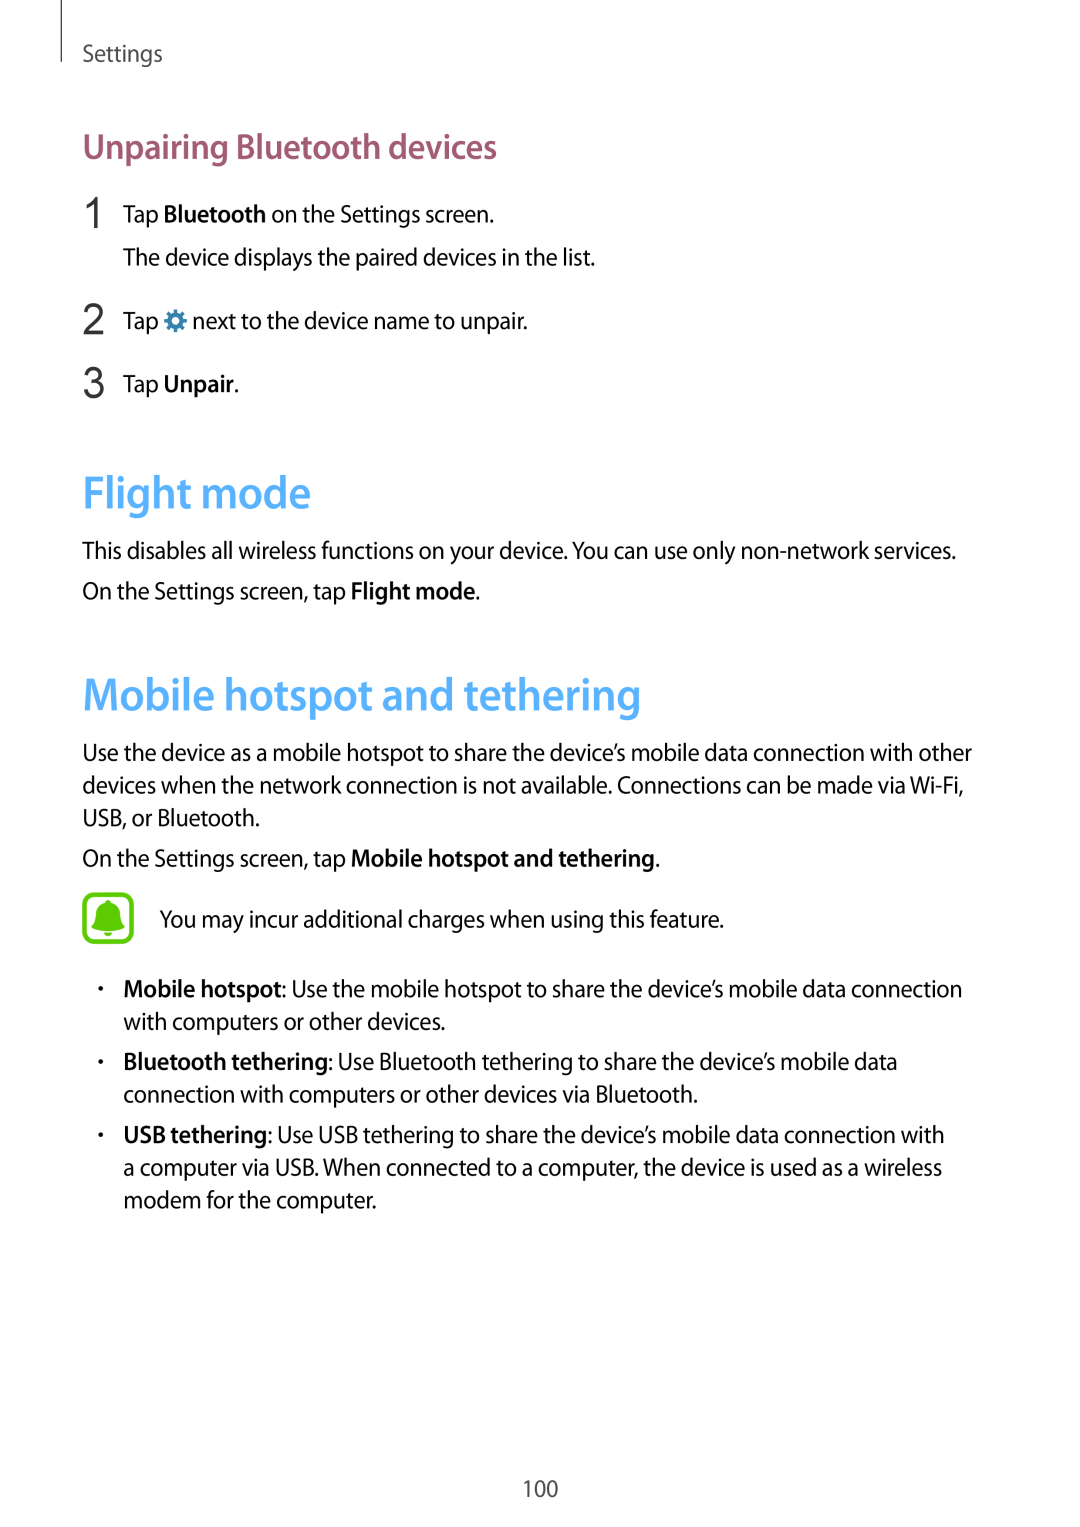 Samsung SM-G920FZBAXXV manual Flight mode, Mobile hotspot and tethering, Unpairing Bluetooth devices, Tap Unpair, Settings 